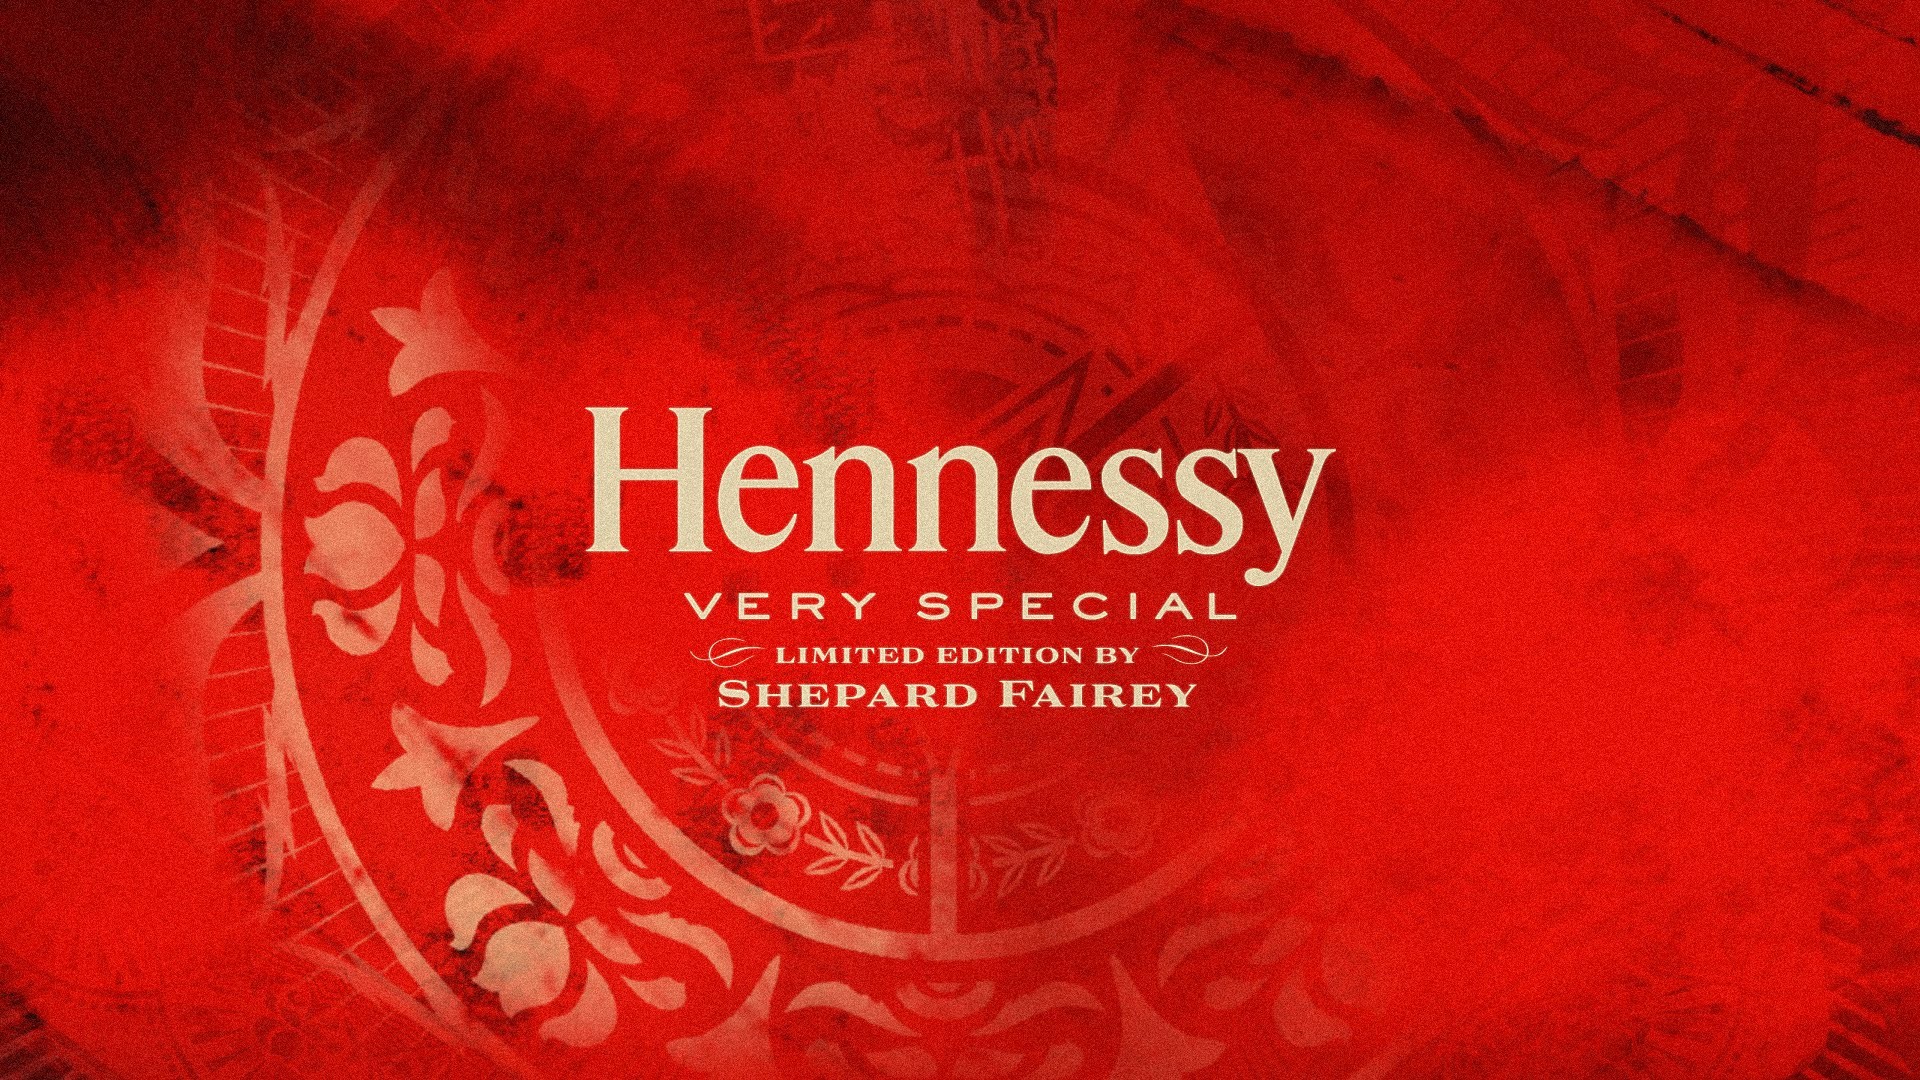 1920x1080 HENNESSY / Shepard Fairey's limited edition / BRAND-DOCUMENT FULL FILM -  YouTube